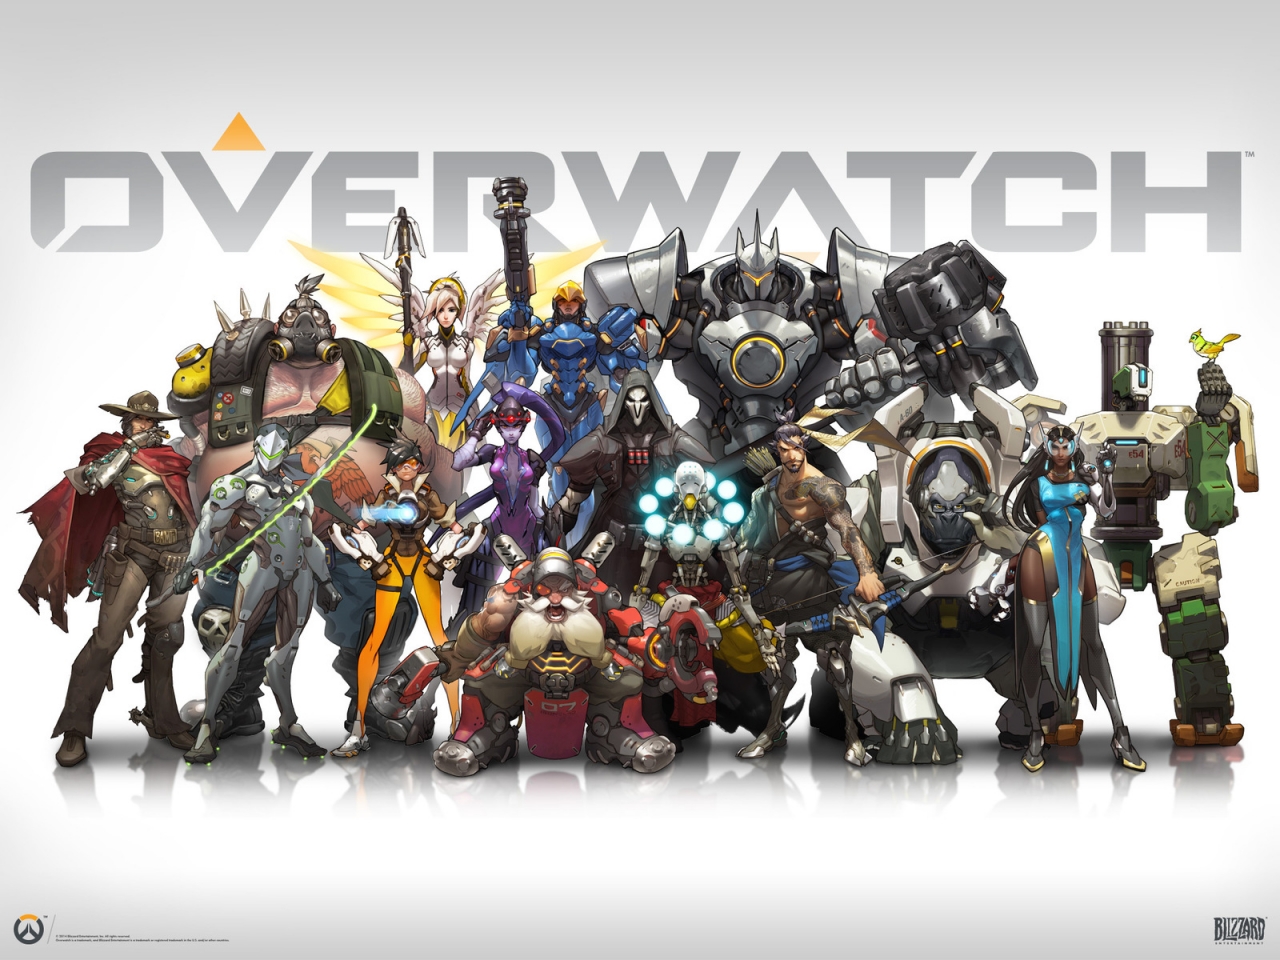 Overwatch Lineup for 1280 x 960 resolution